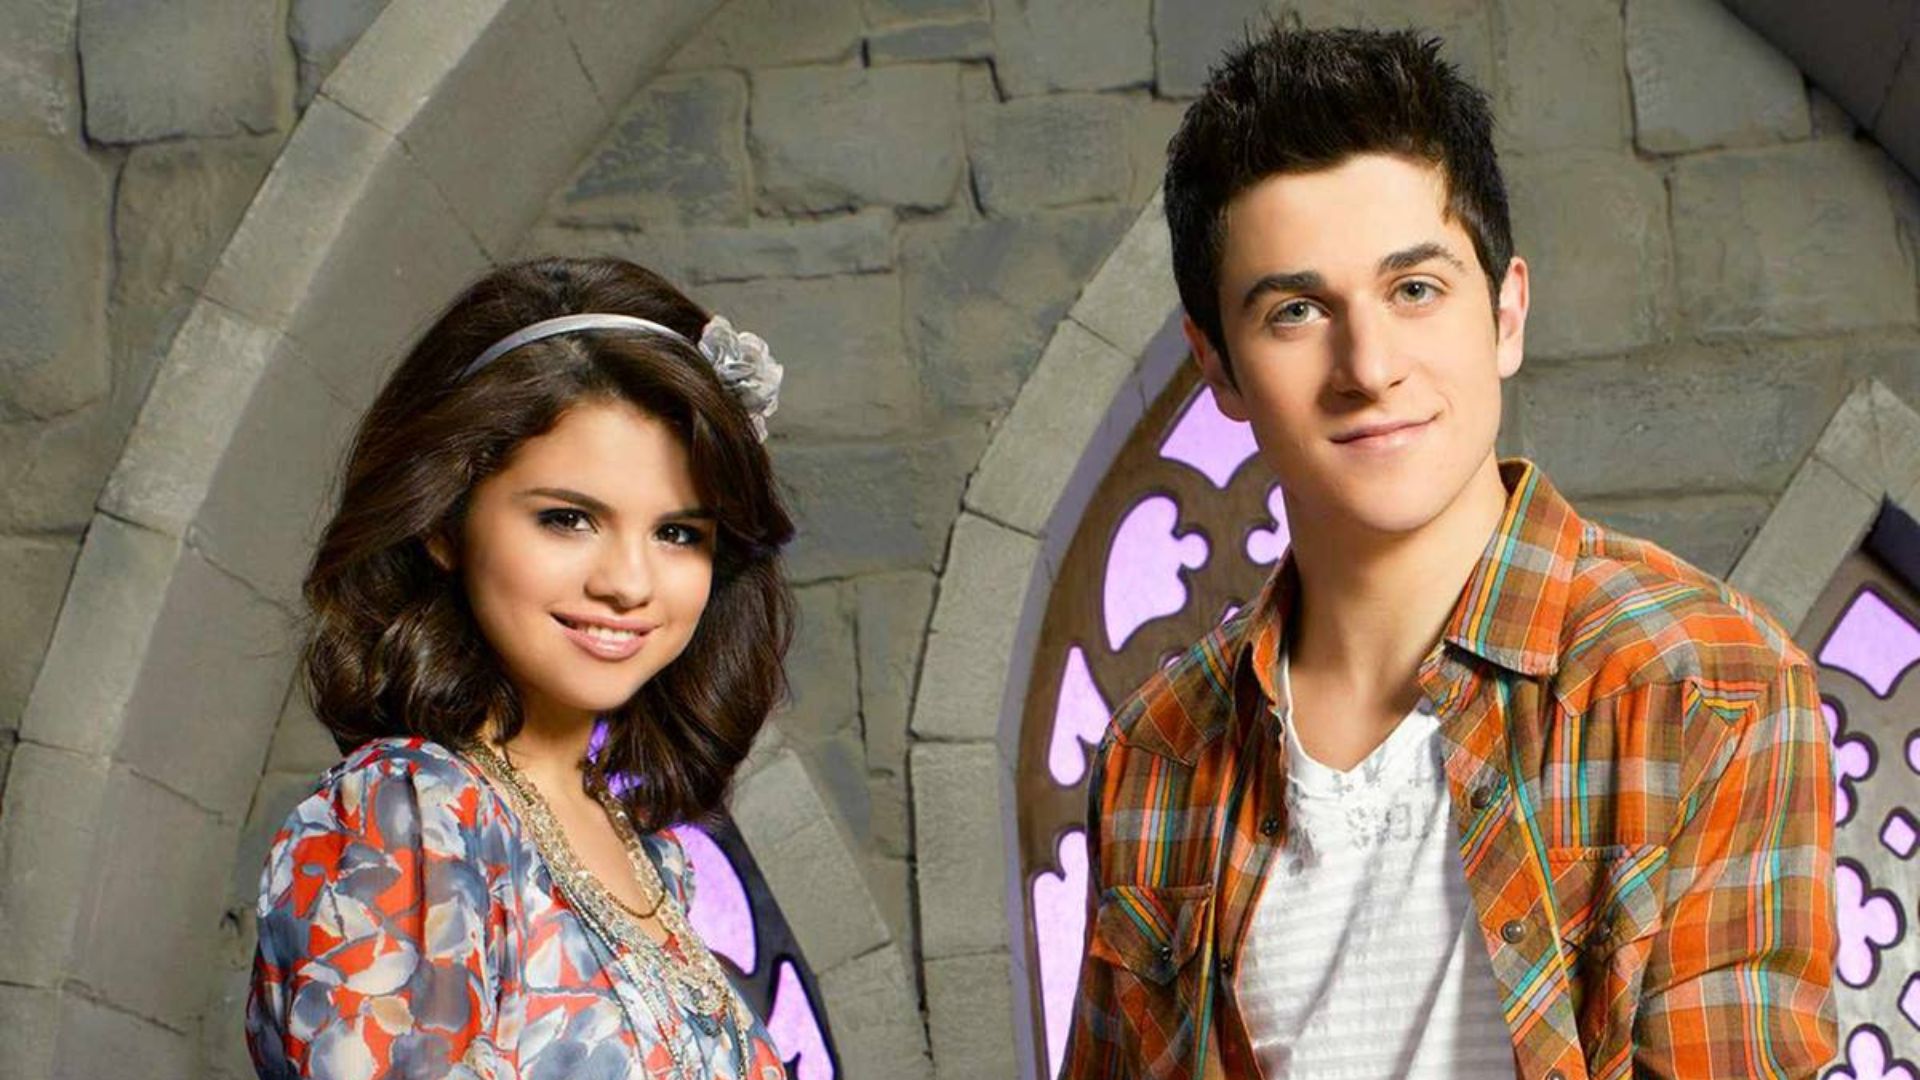 David Henrie and Selena Gomez team up for the “Wizards of Waverly Place” sequel